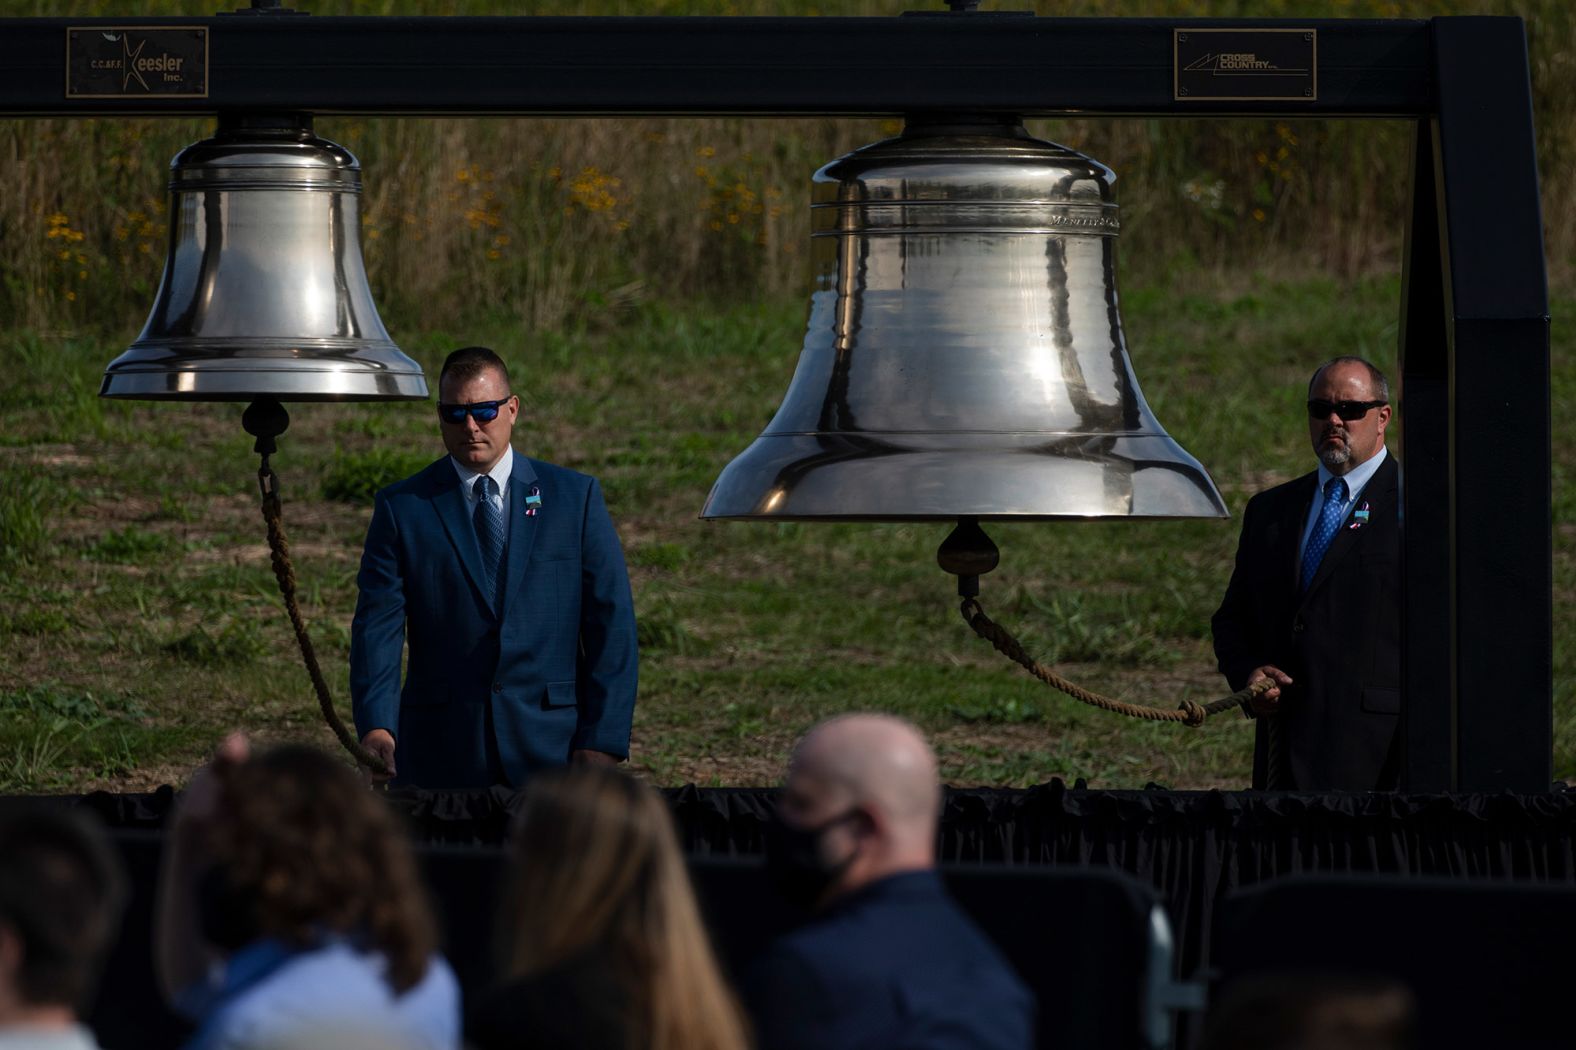 Bells are rung during the ceremony near Shanksville in honor of the passengers and crew members who died on 9/11.